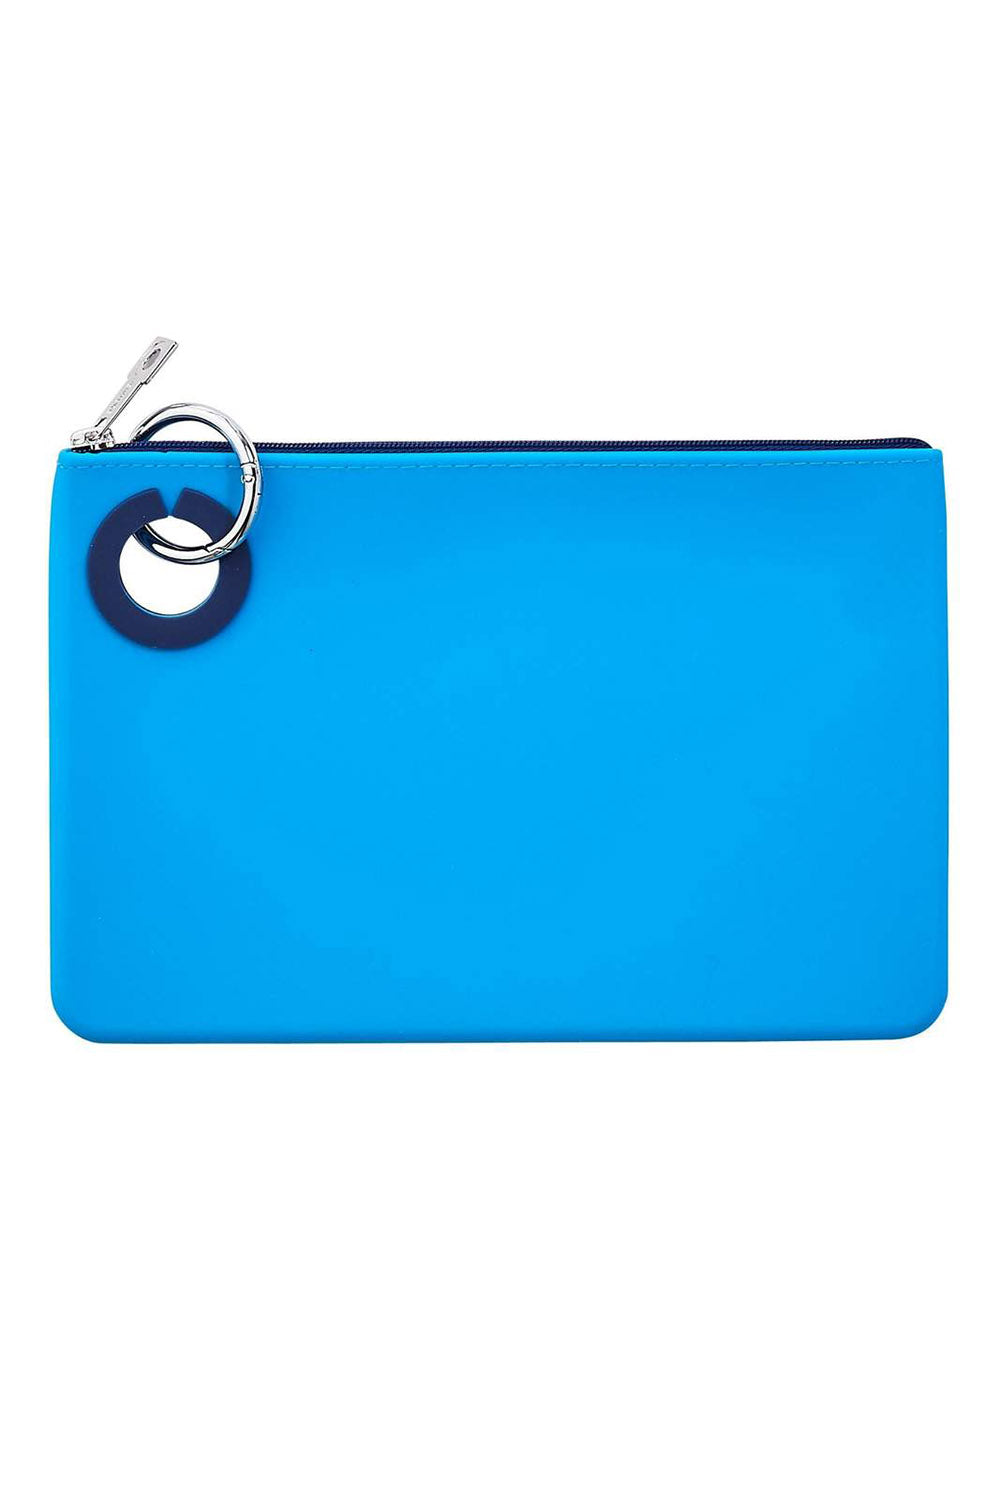 Silicone Pouch Large - Solid Peacock